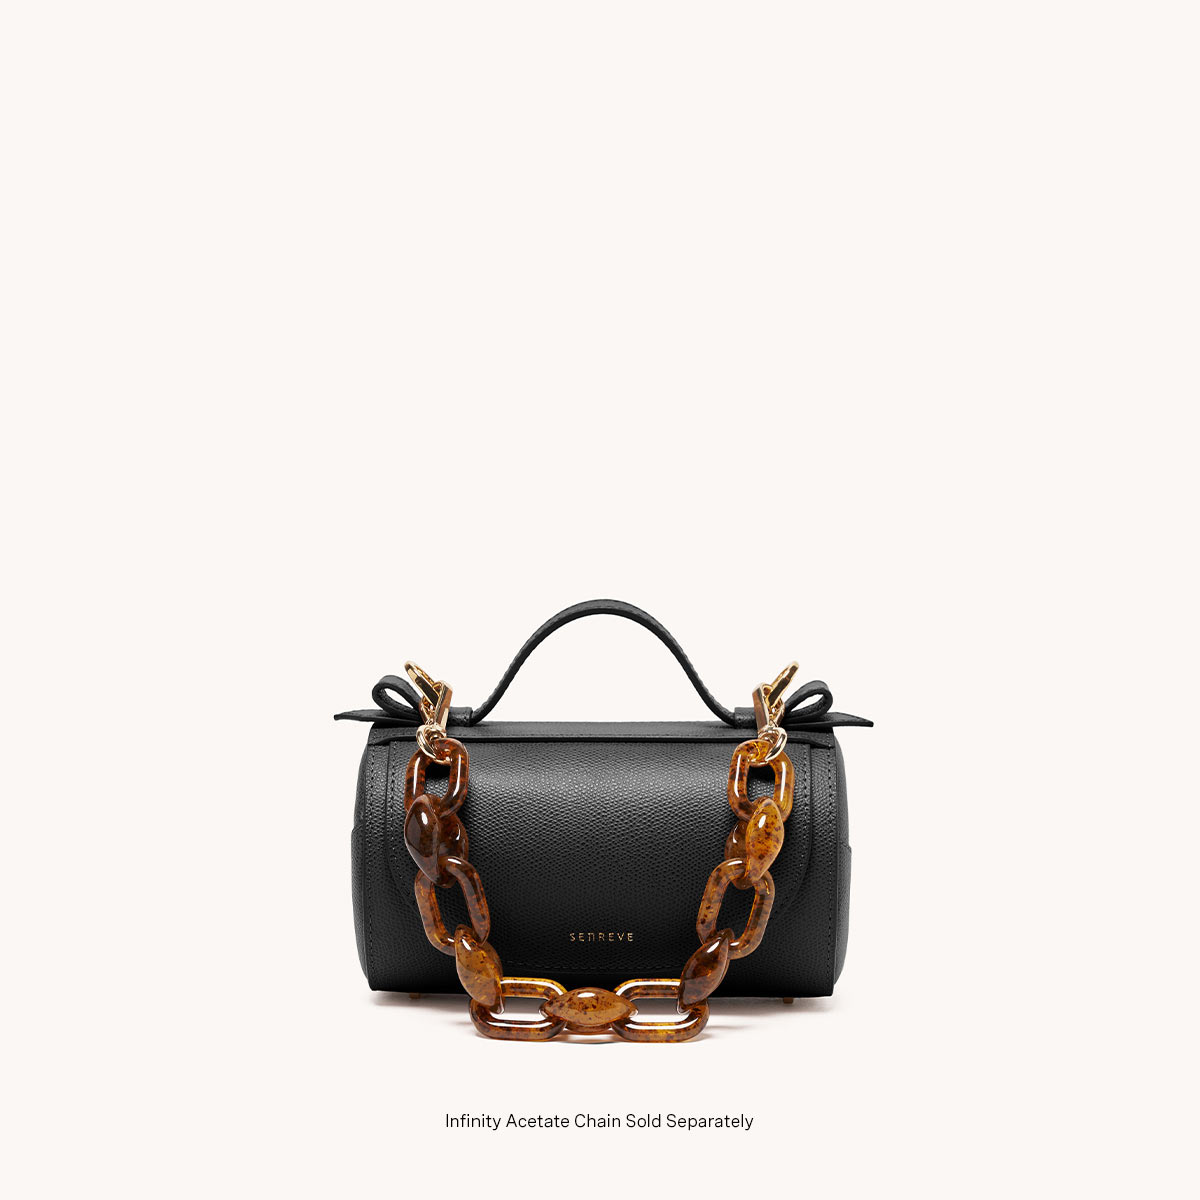 Mini Barrel Bag Pebbled Noir Gold Hardware Front, Removable Infinity Acetate Chain Link Strap Attached
